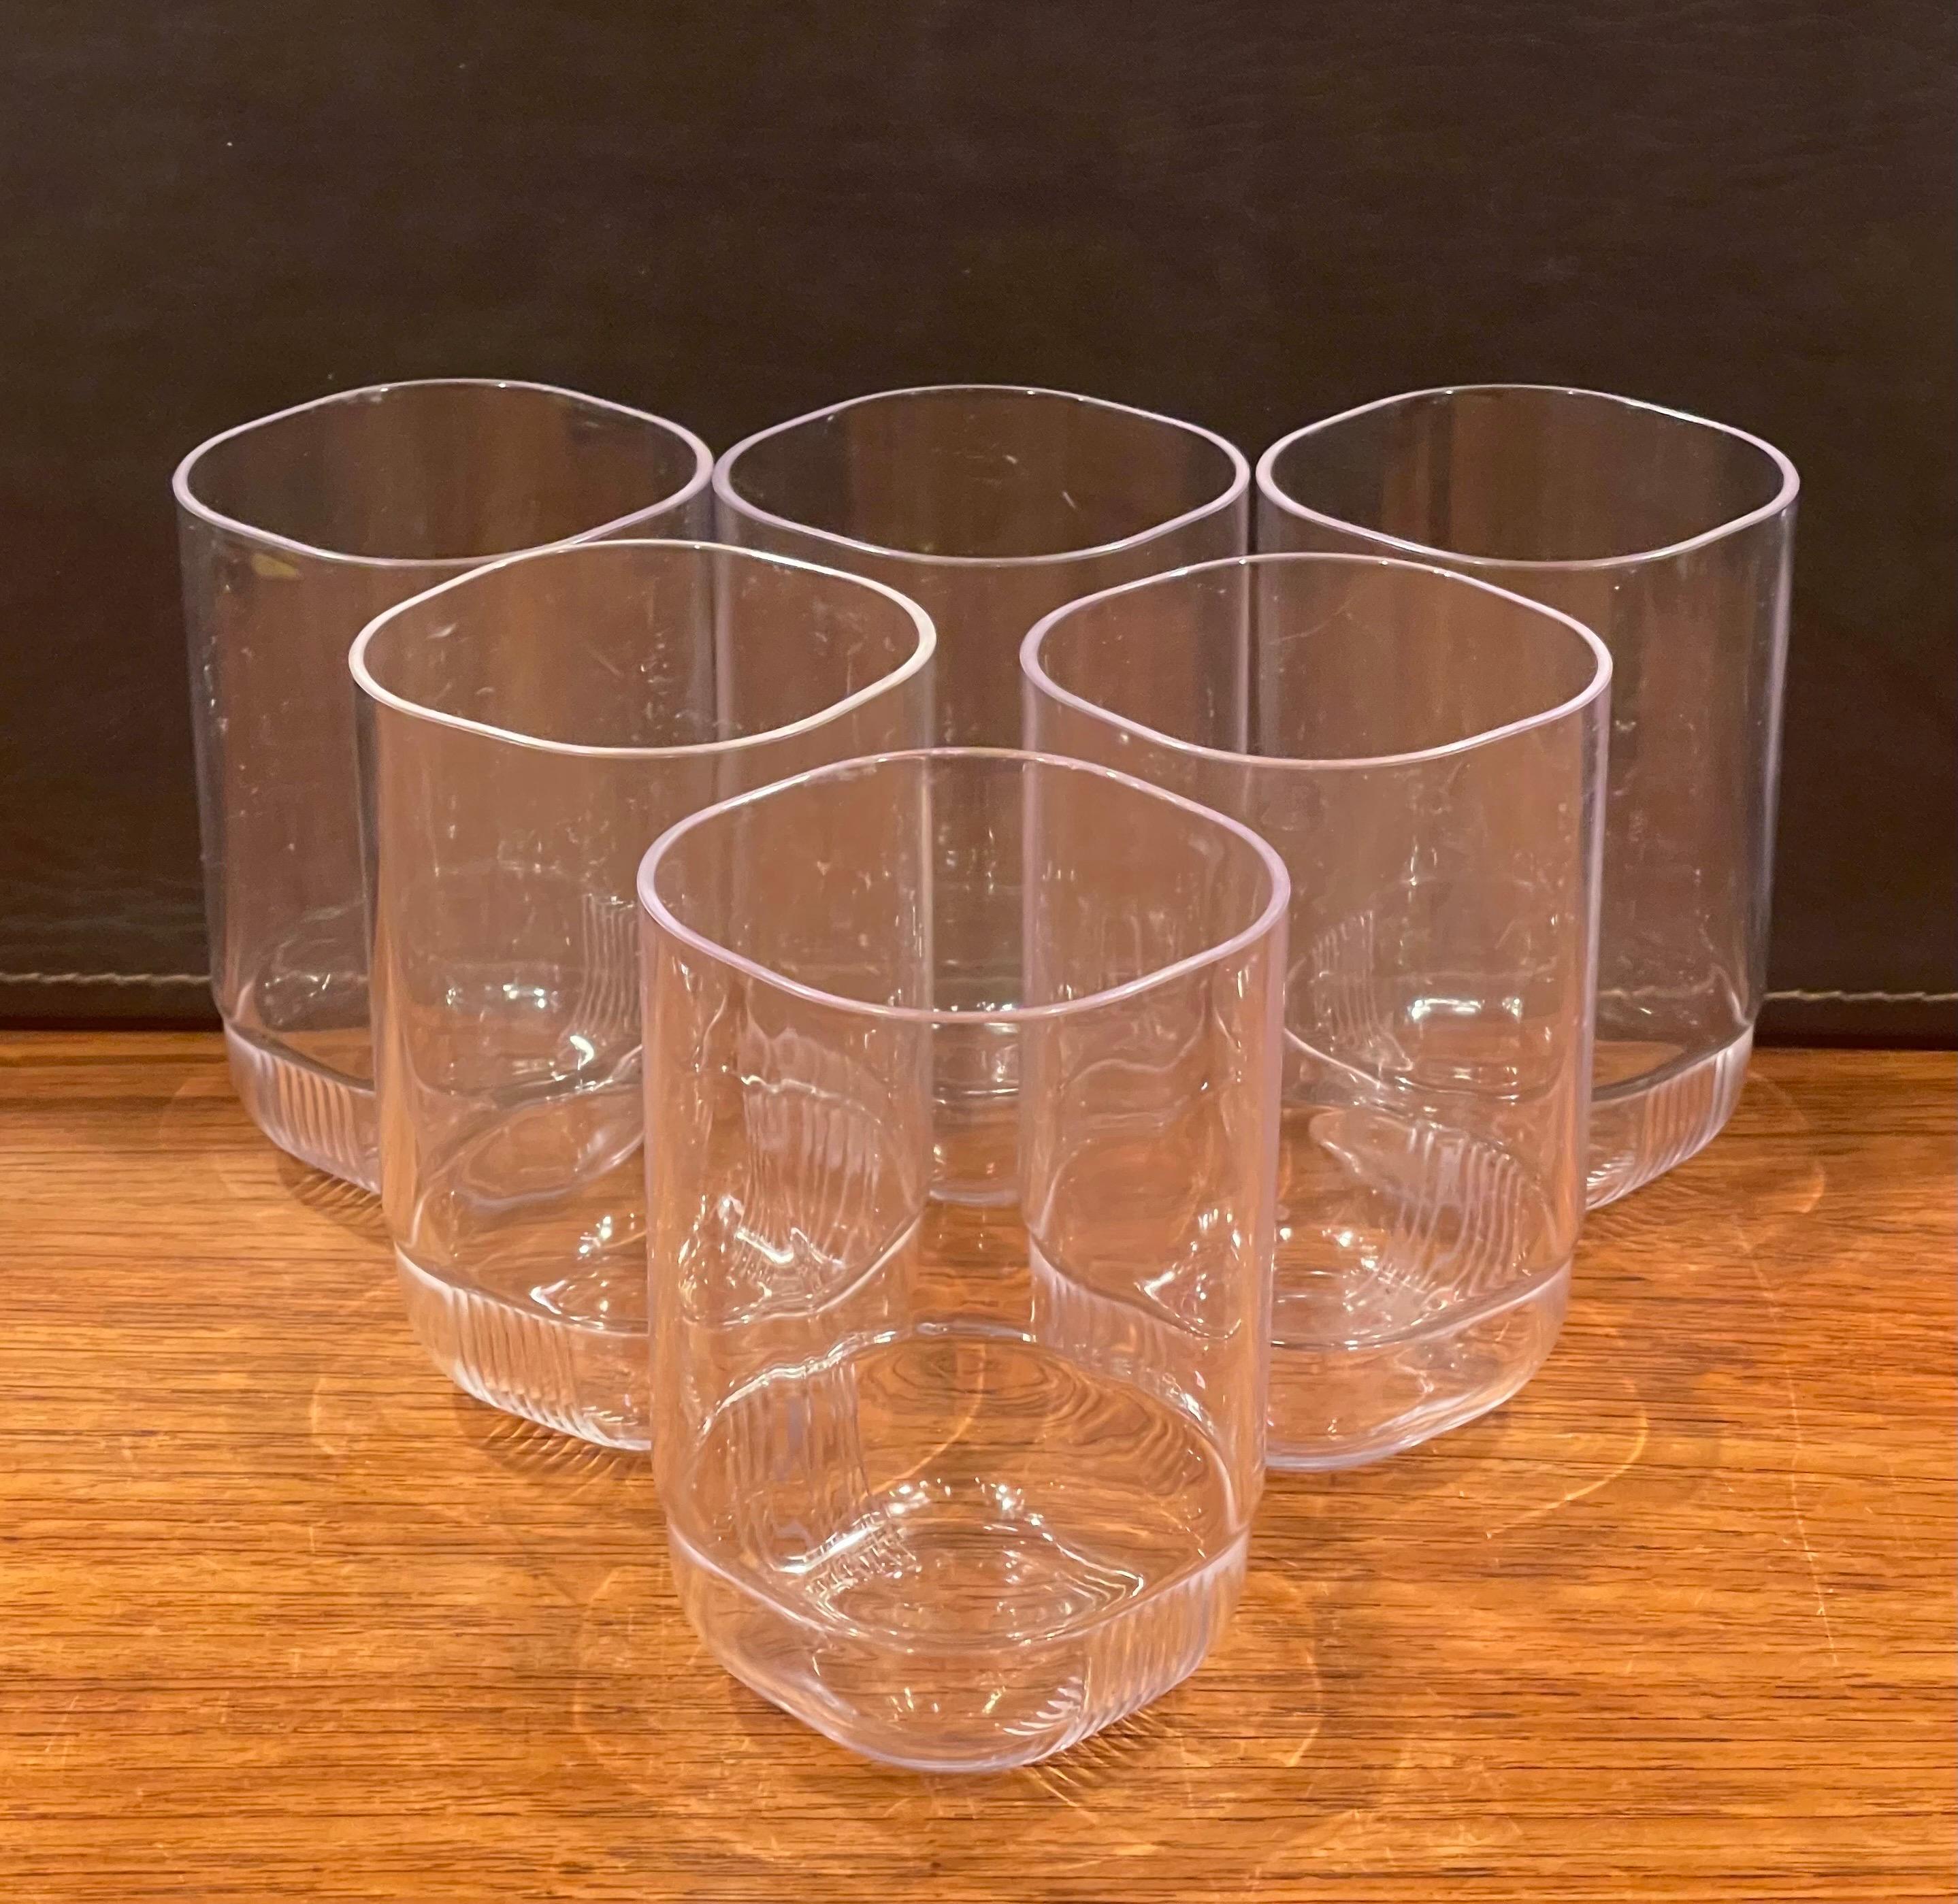 Very functional and cool set of six modern lucite drinking glasses by Guzzini of Italy, circa 1980s. The glasses are in very good condition and each piece measures 3 W x 3